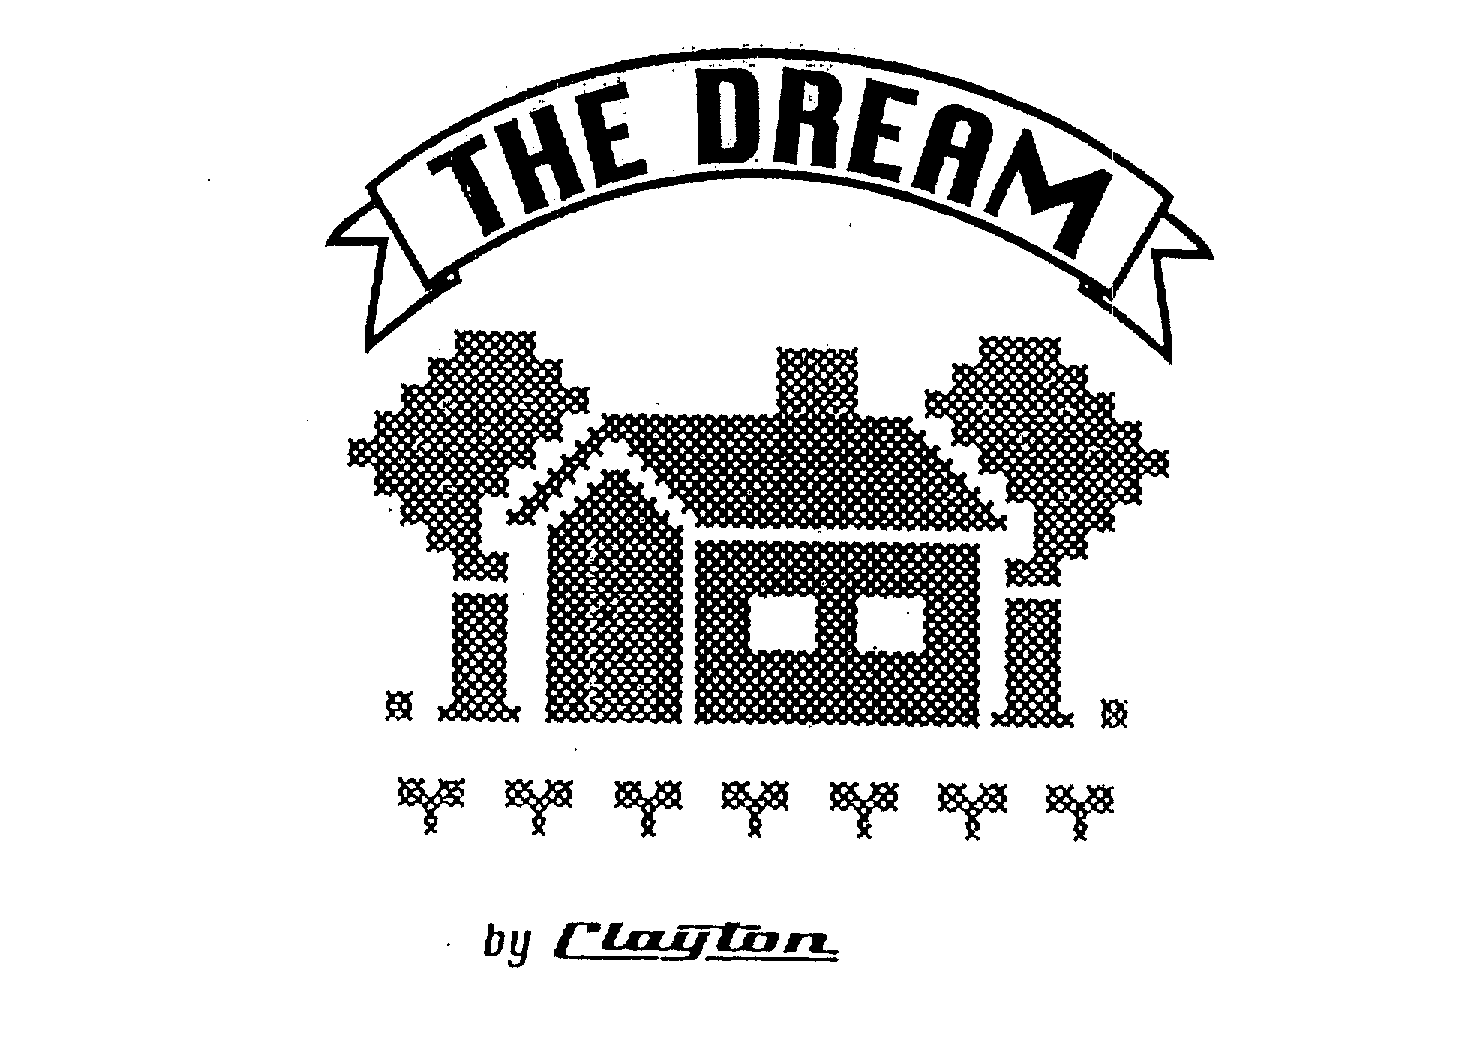  THE DREAM BY CLAYTON